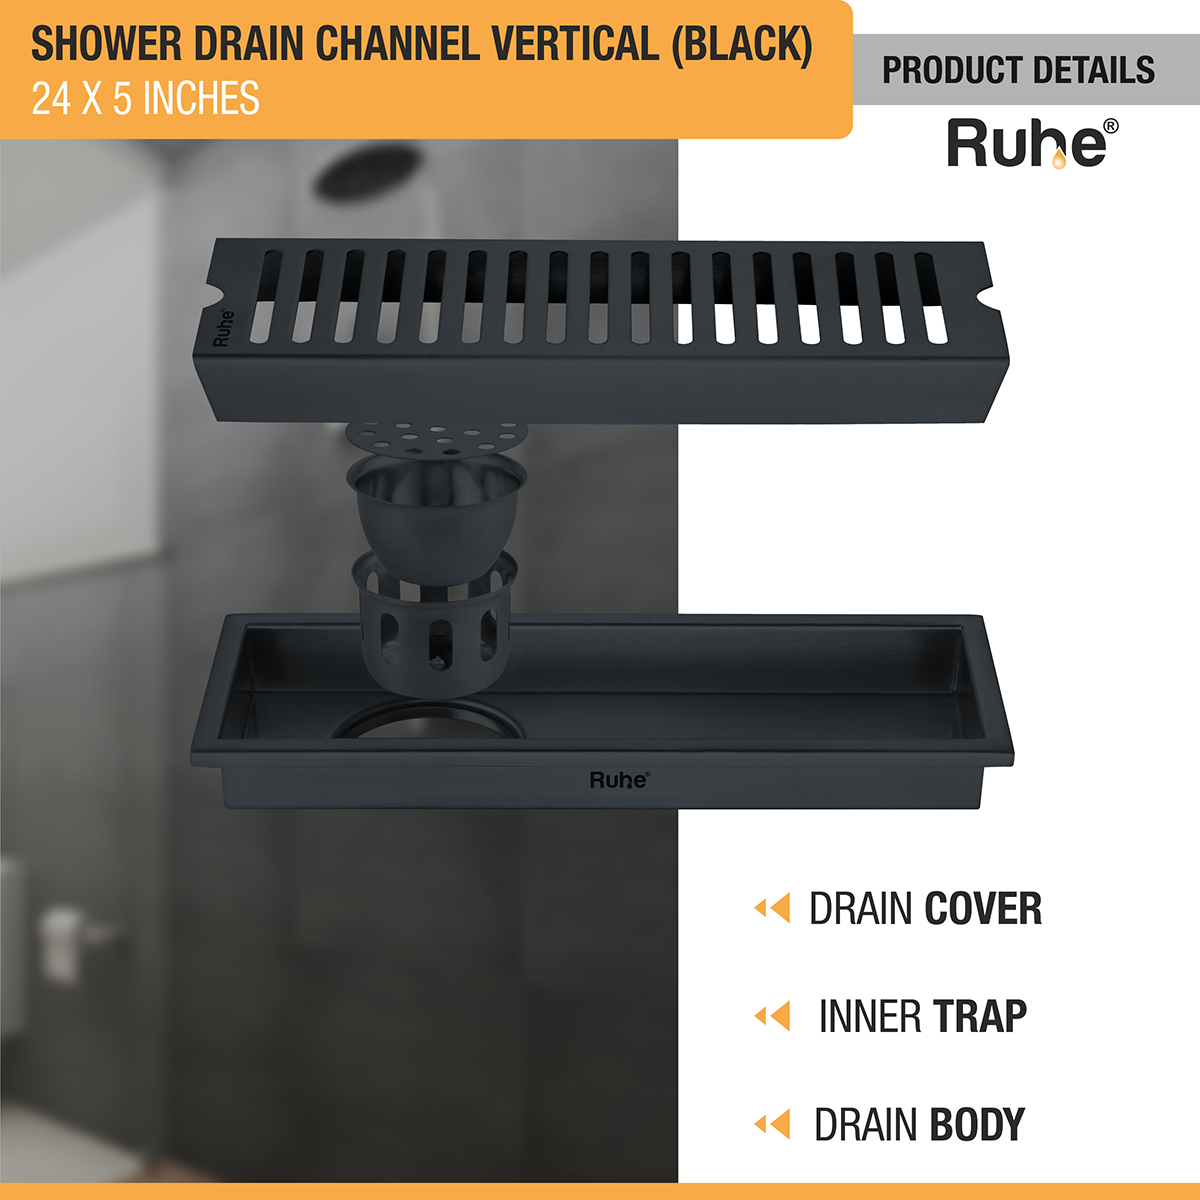 Vertical Shower Drain Channel (24 x 5 Inches) Black PVD Coated with drain cover, inner insect trap, drain body